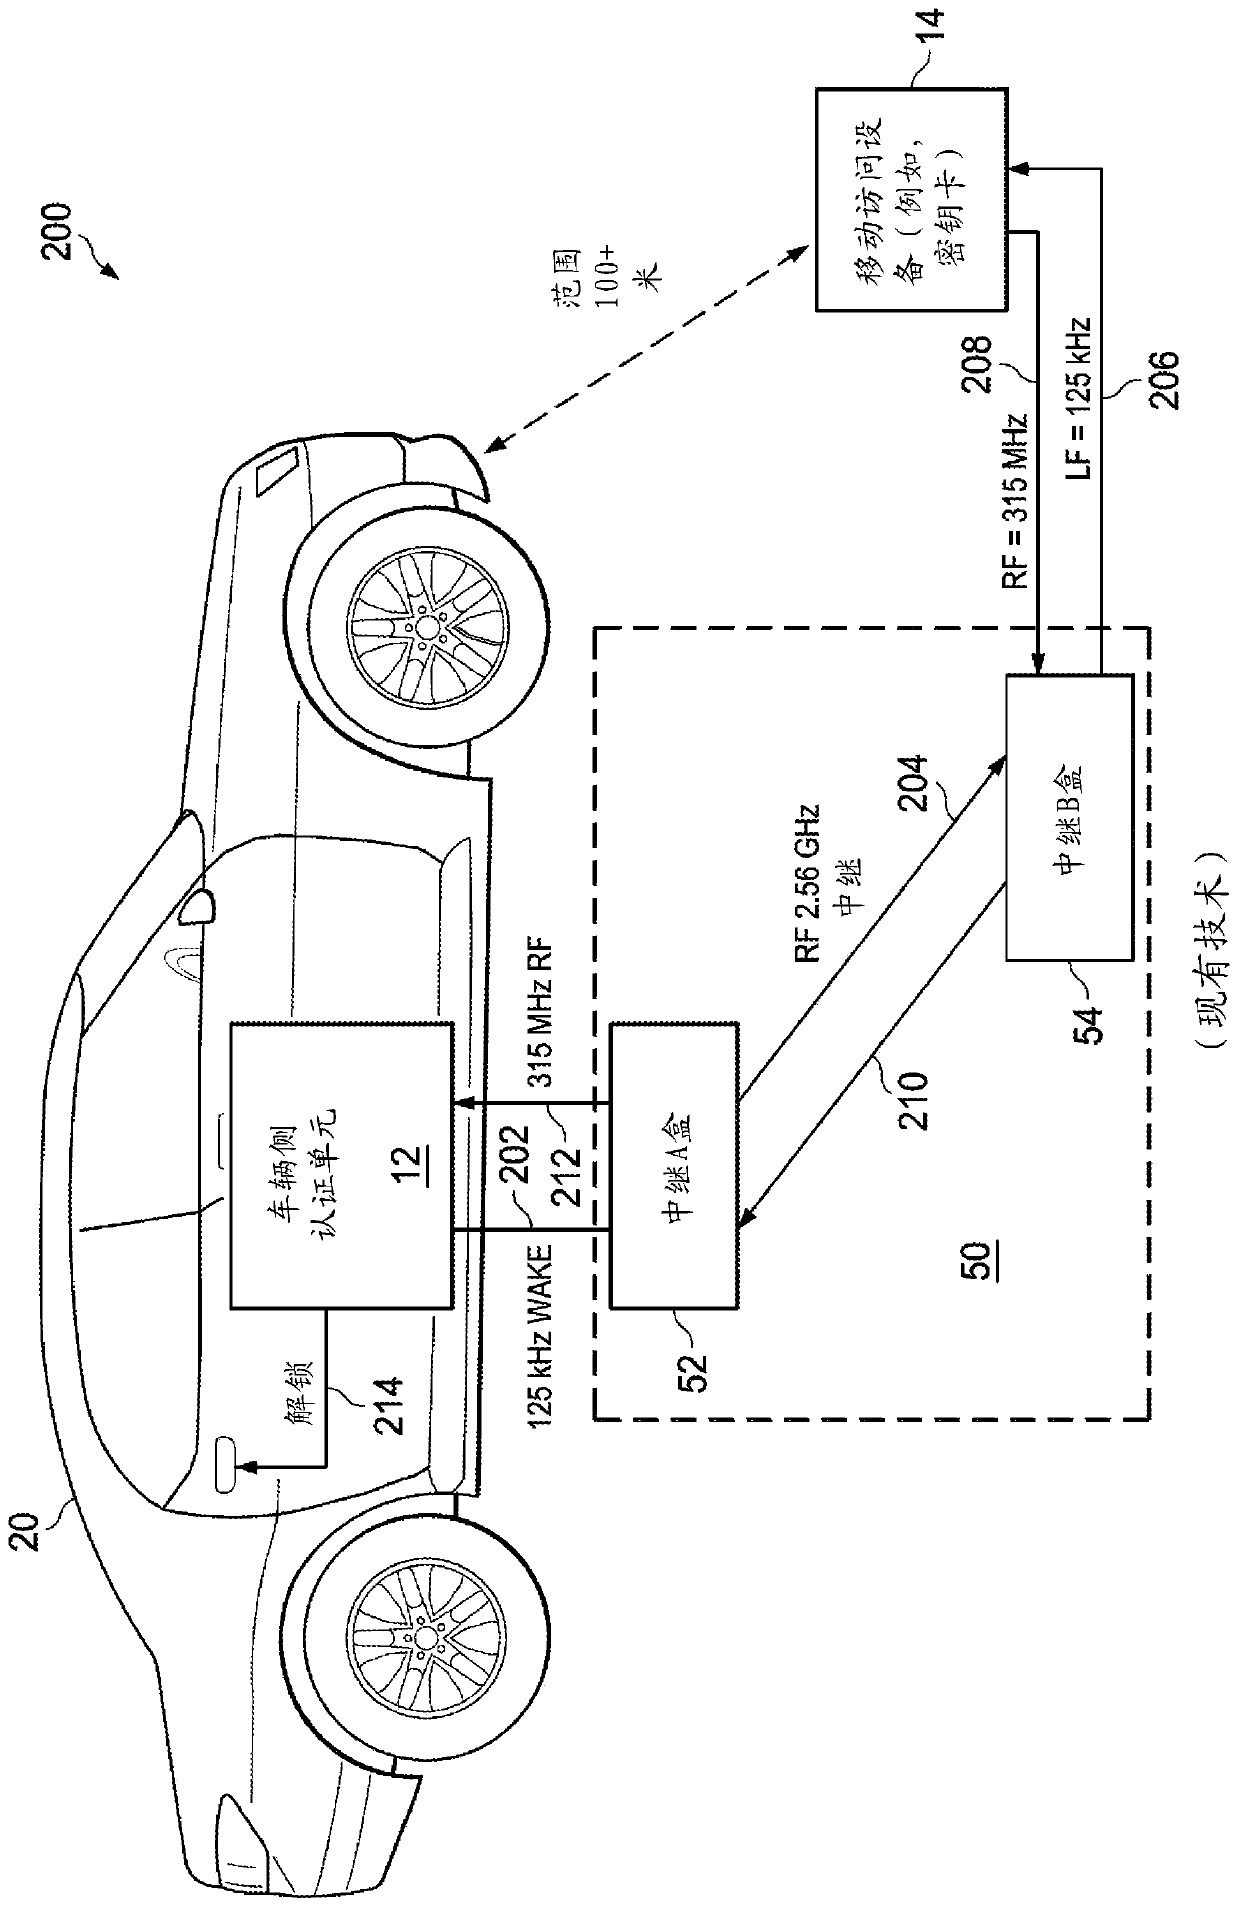 Systems and methods for managing access to a vehicle or other object using environmental data